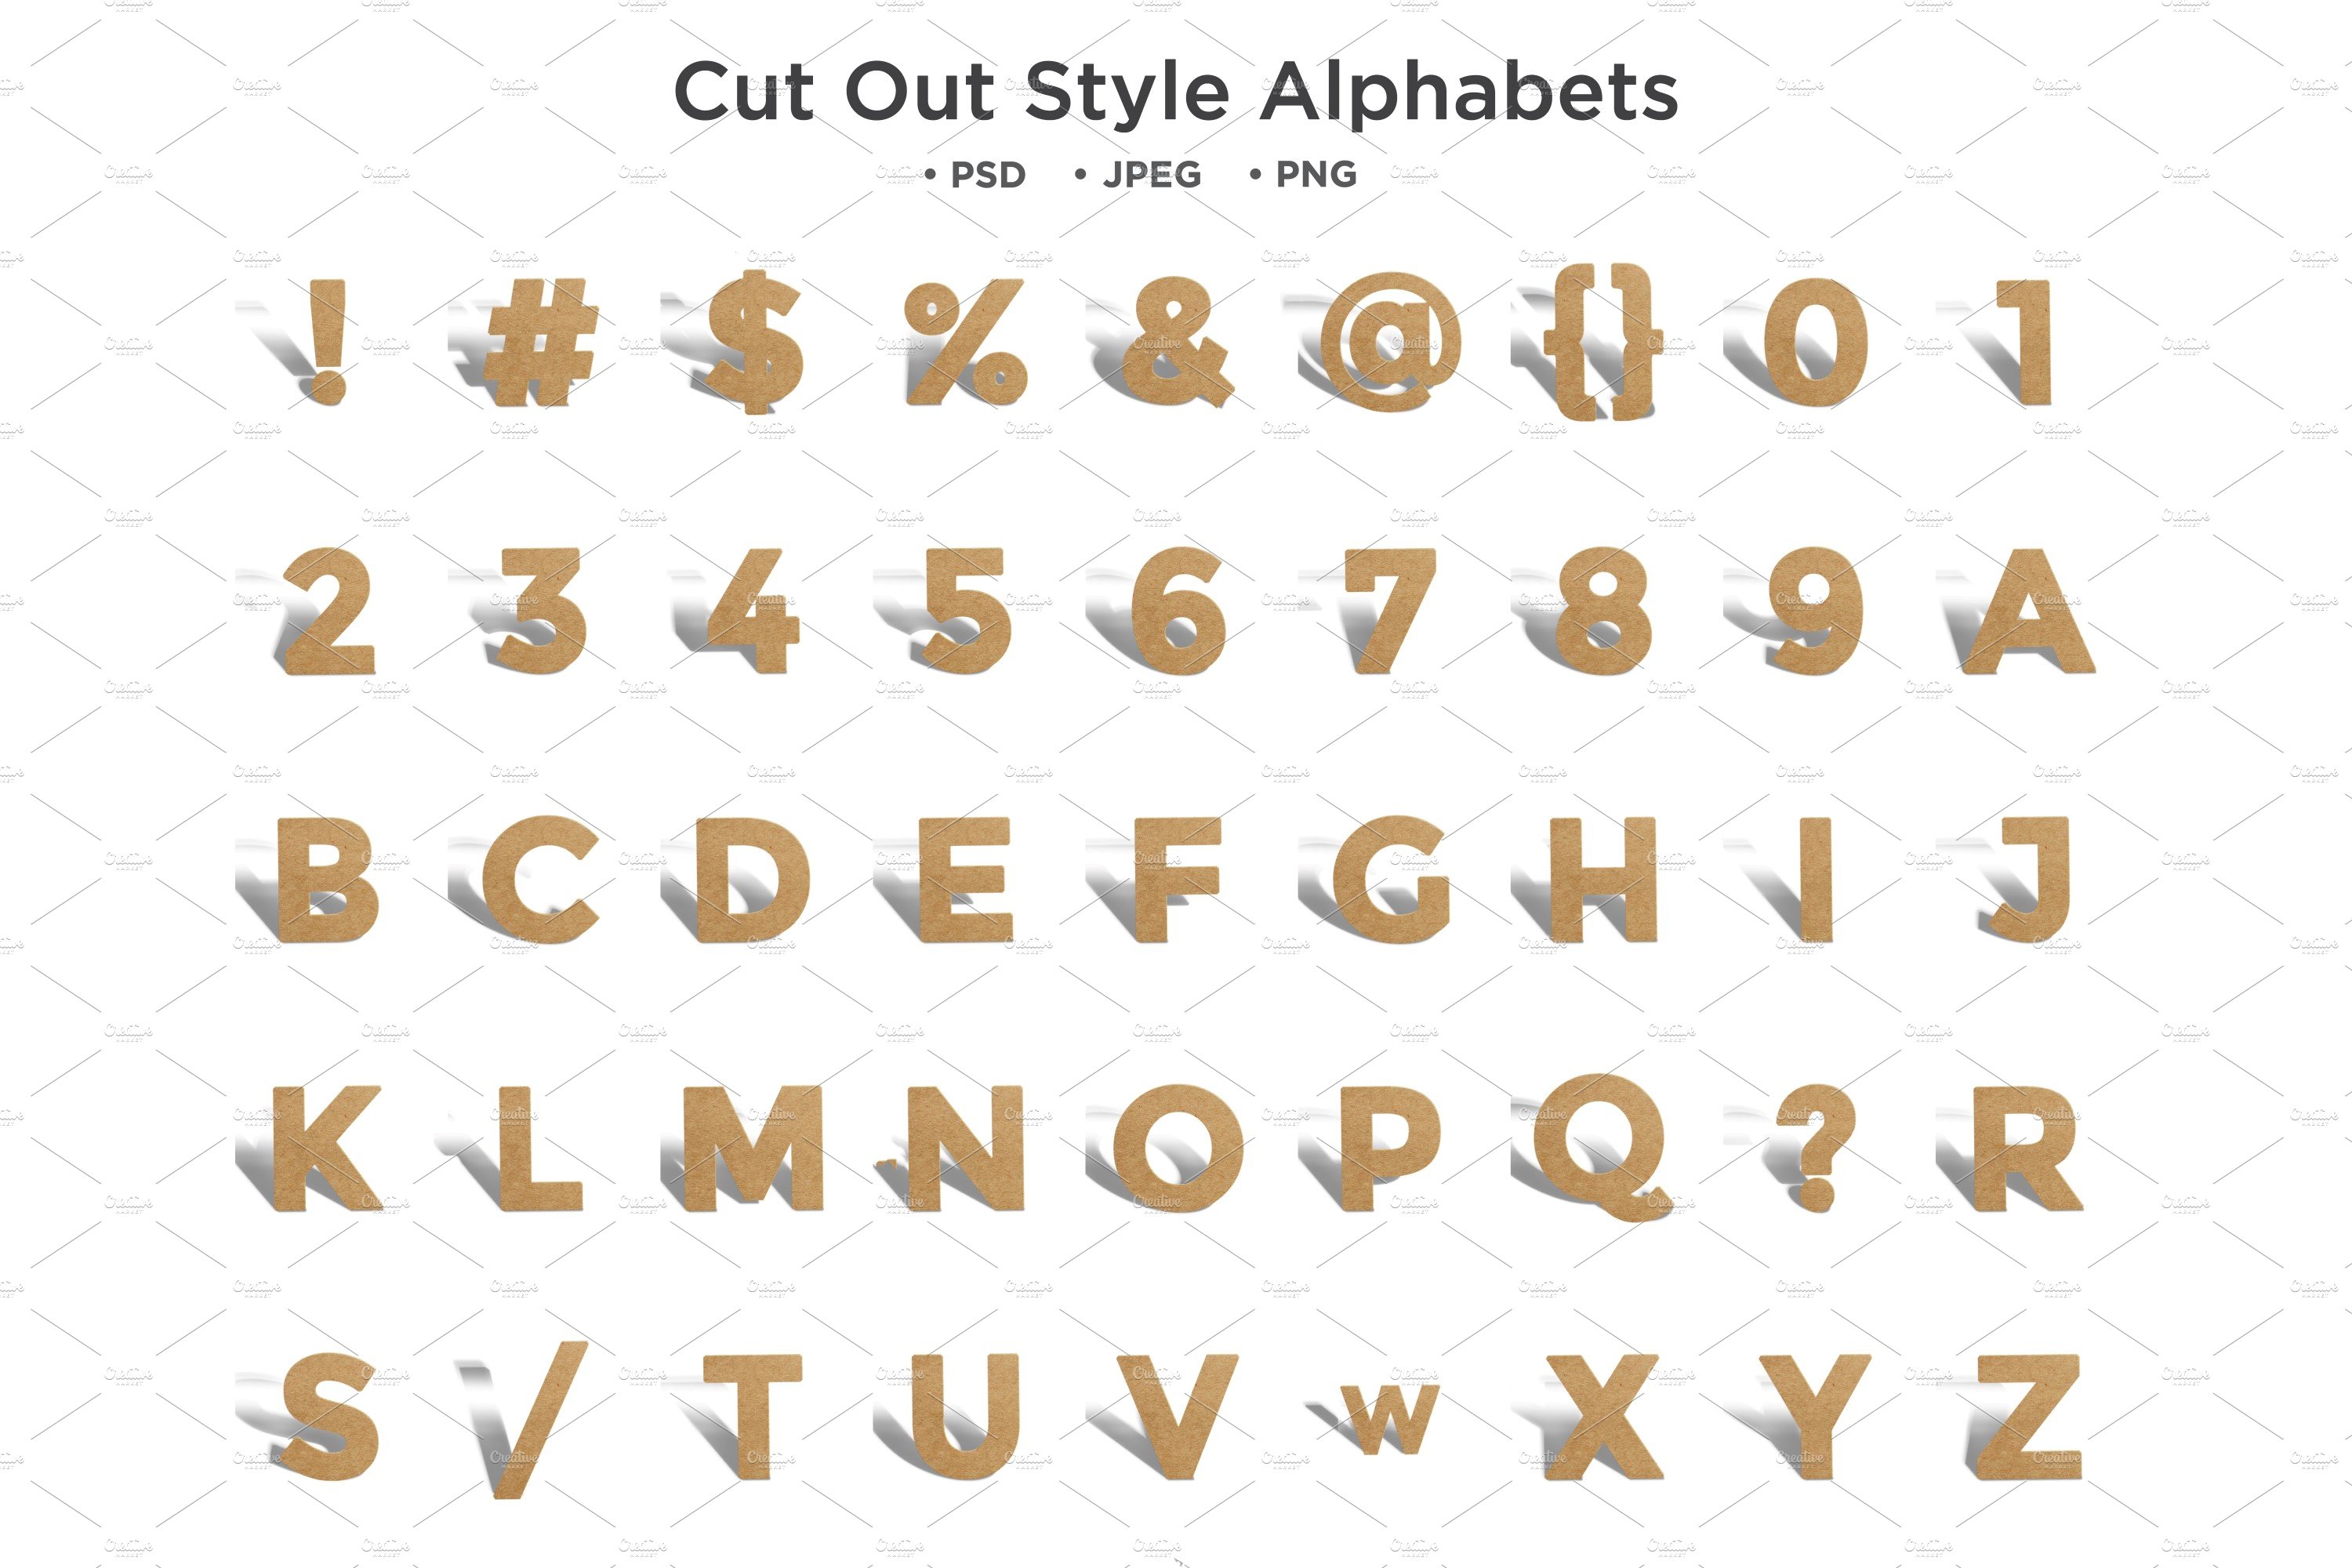 Cut Out Style Alphabet Typographycover image.